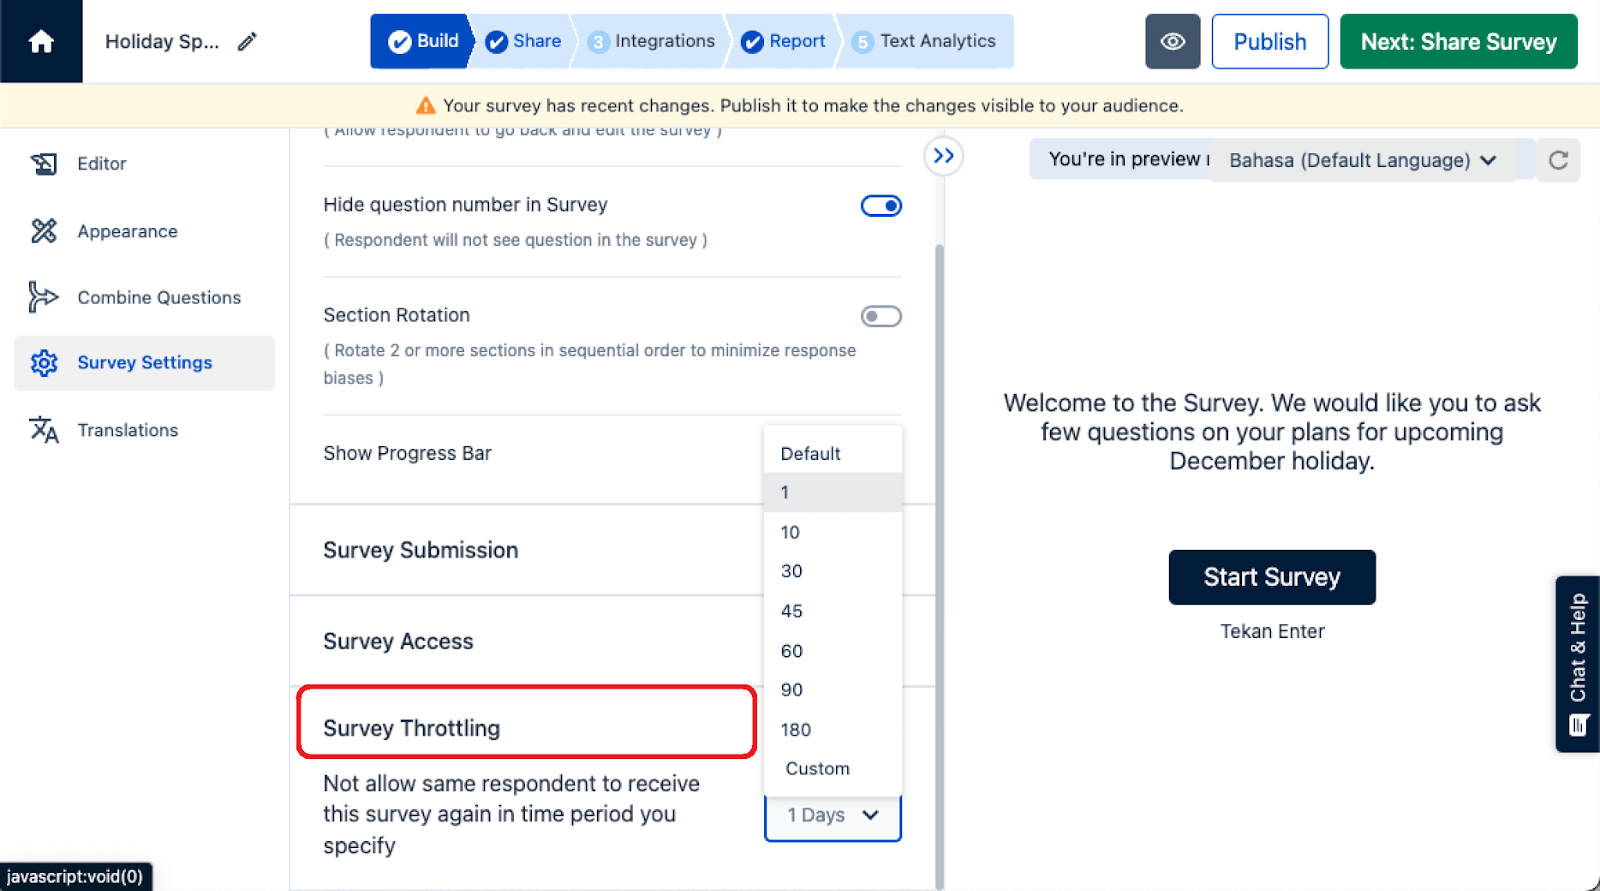 The image shows the Survey Throttling feature of SurveySensum where you can add a defined timeline to your survey frequency which will not allow you to send the survey to your customers within that time frame.